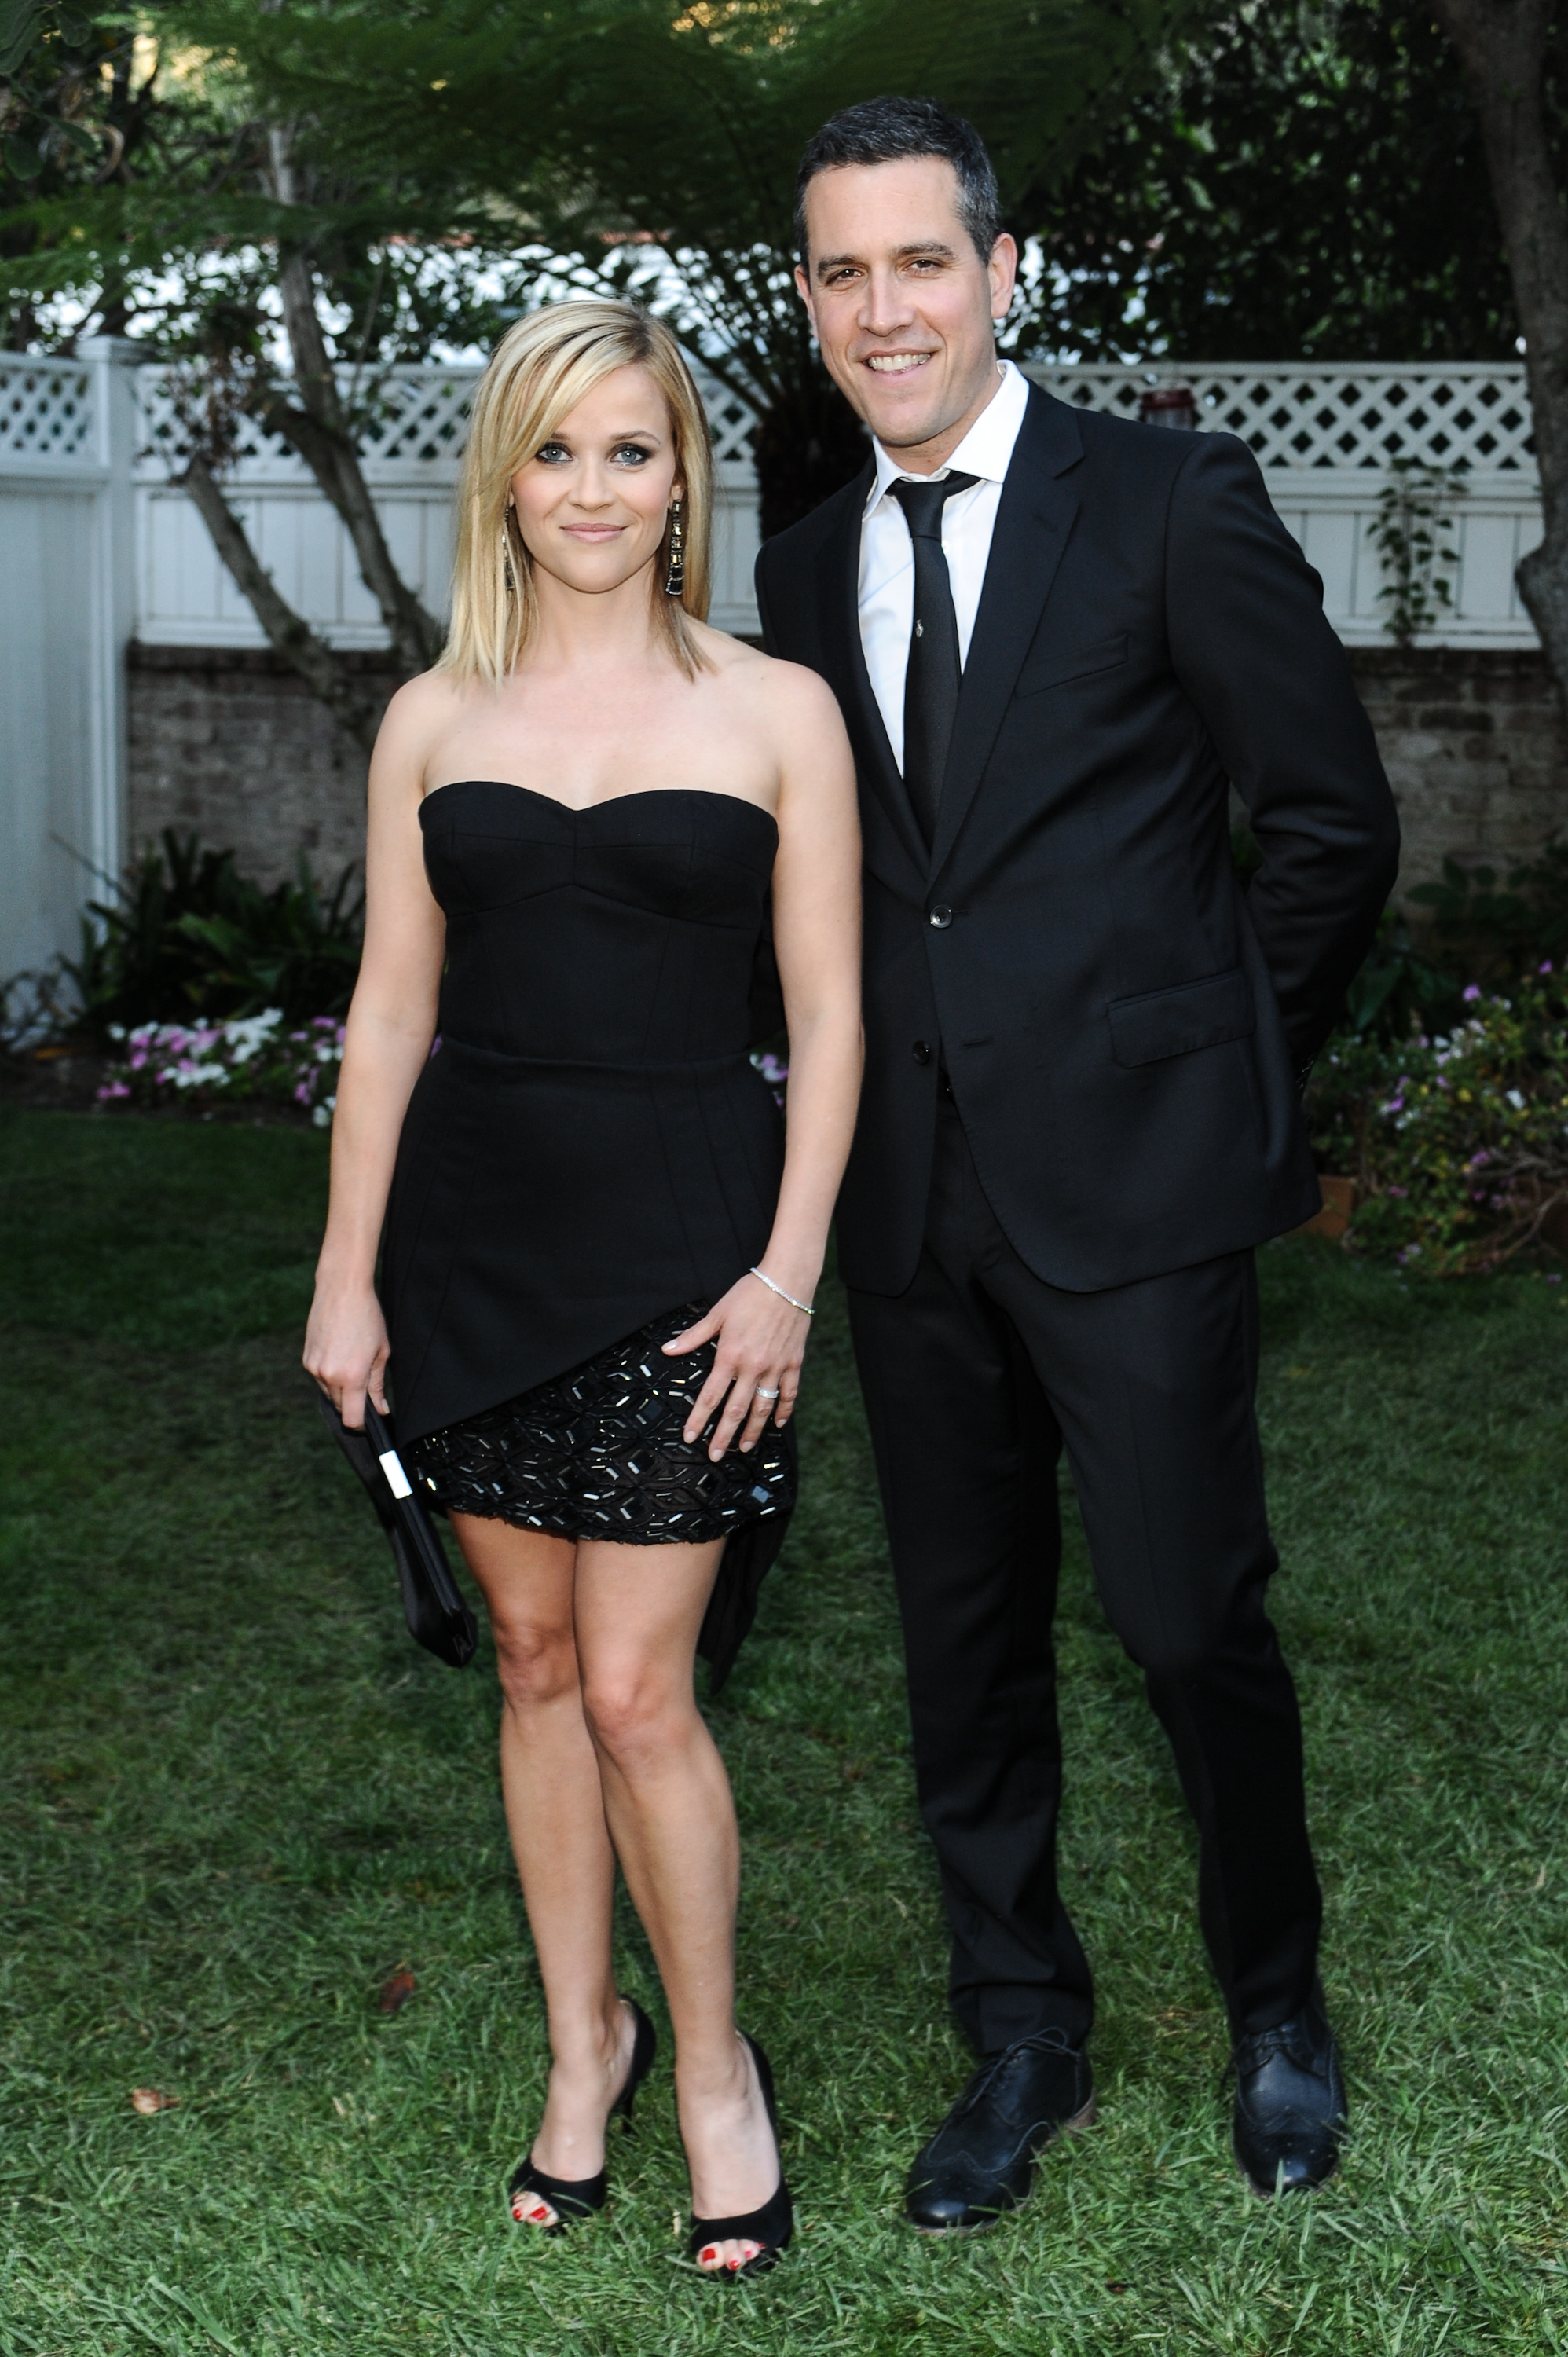 Talent agent Jim Toth and his wife actress Reese Witherspoon attend 2013 Los Angeles Dance Project Benefit Gala on June 20, 2013 in Los Angeles, California | Source: Getty Images